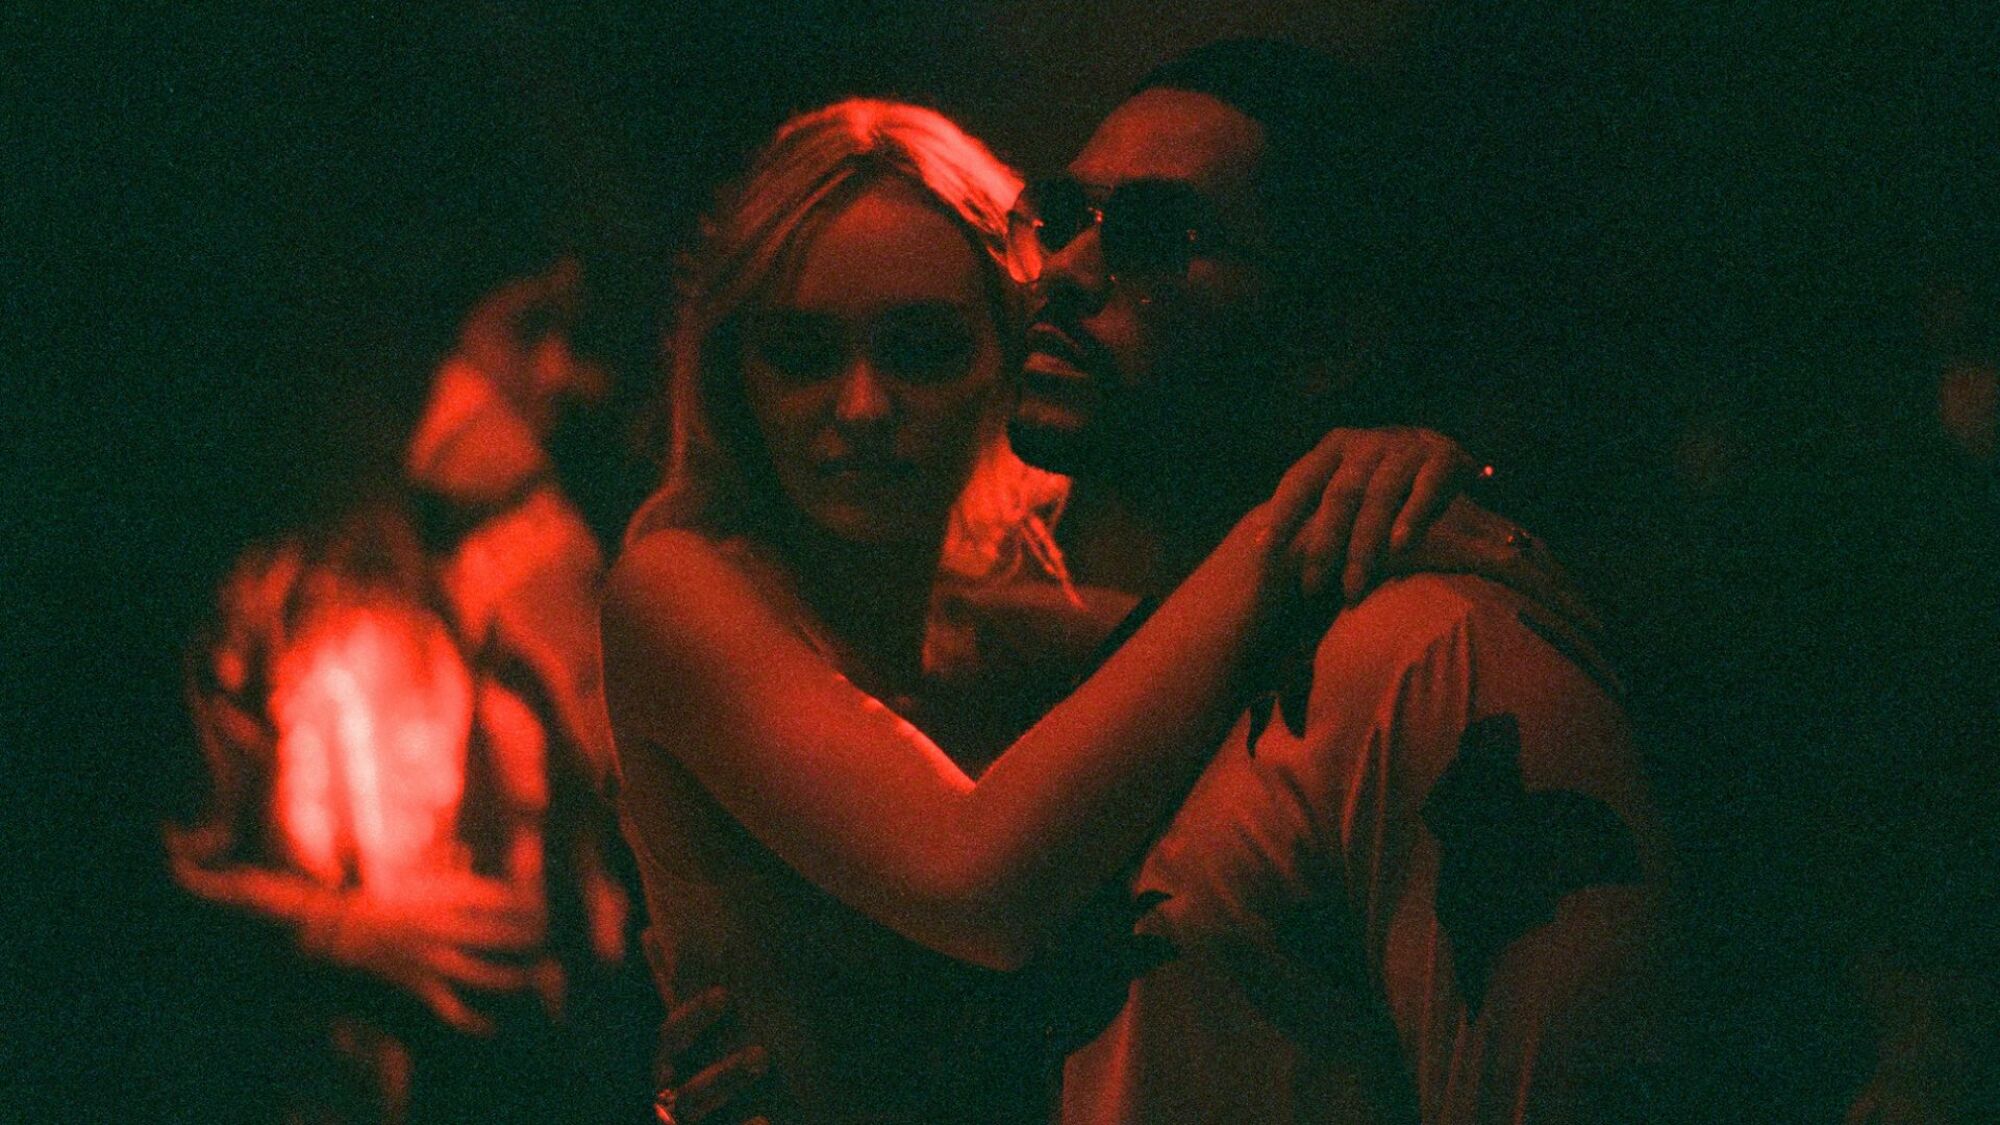 Lily-Rose Depp and Abel “The Weeknd” Tesfaye embrace in "The Idol."